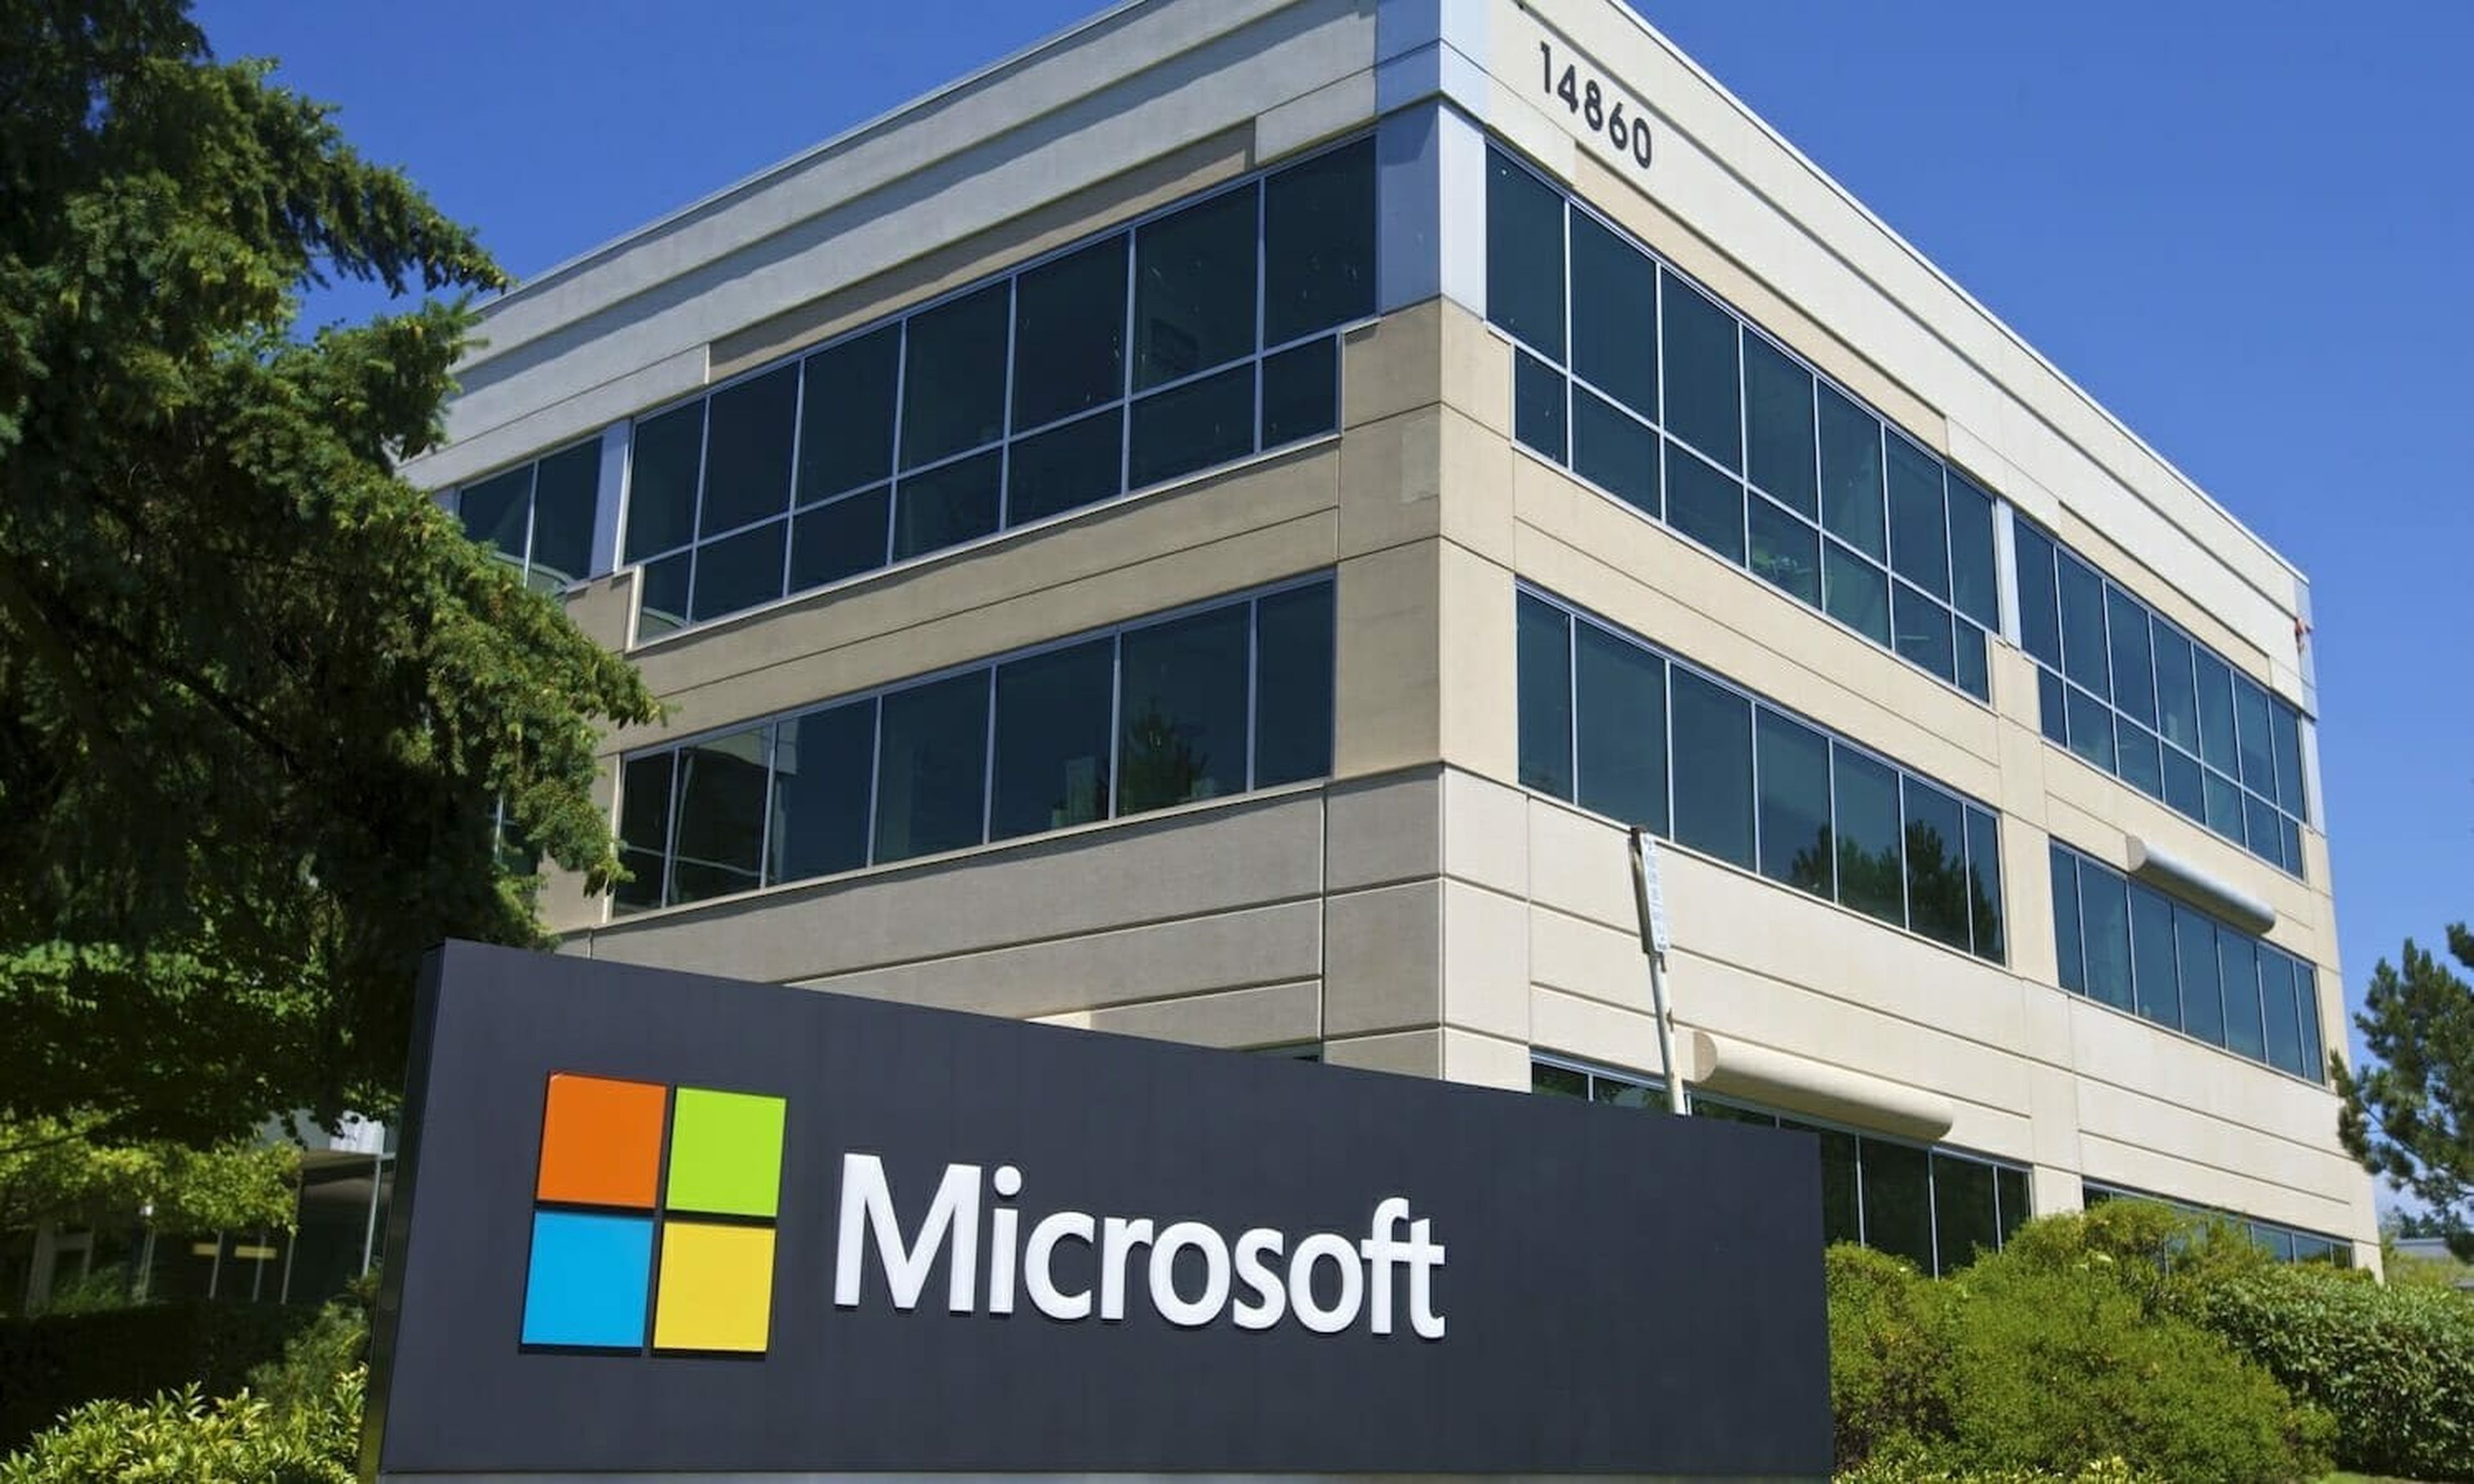 Today’s columnist, Sean Deuby of Semperis, offers five tips that will help security teams get proactive on disaster recovery for Microsoft’s Active Directory. (Stephen Brashear/Getty Images)